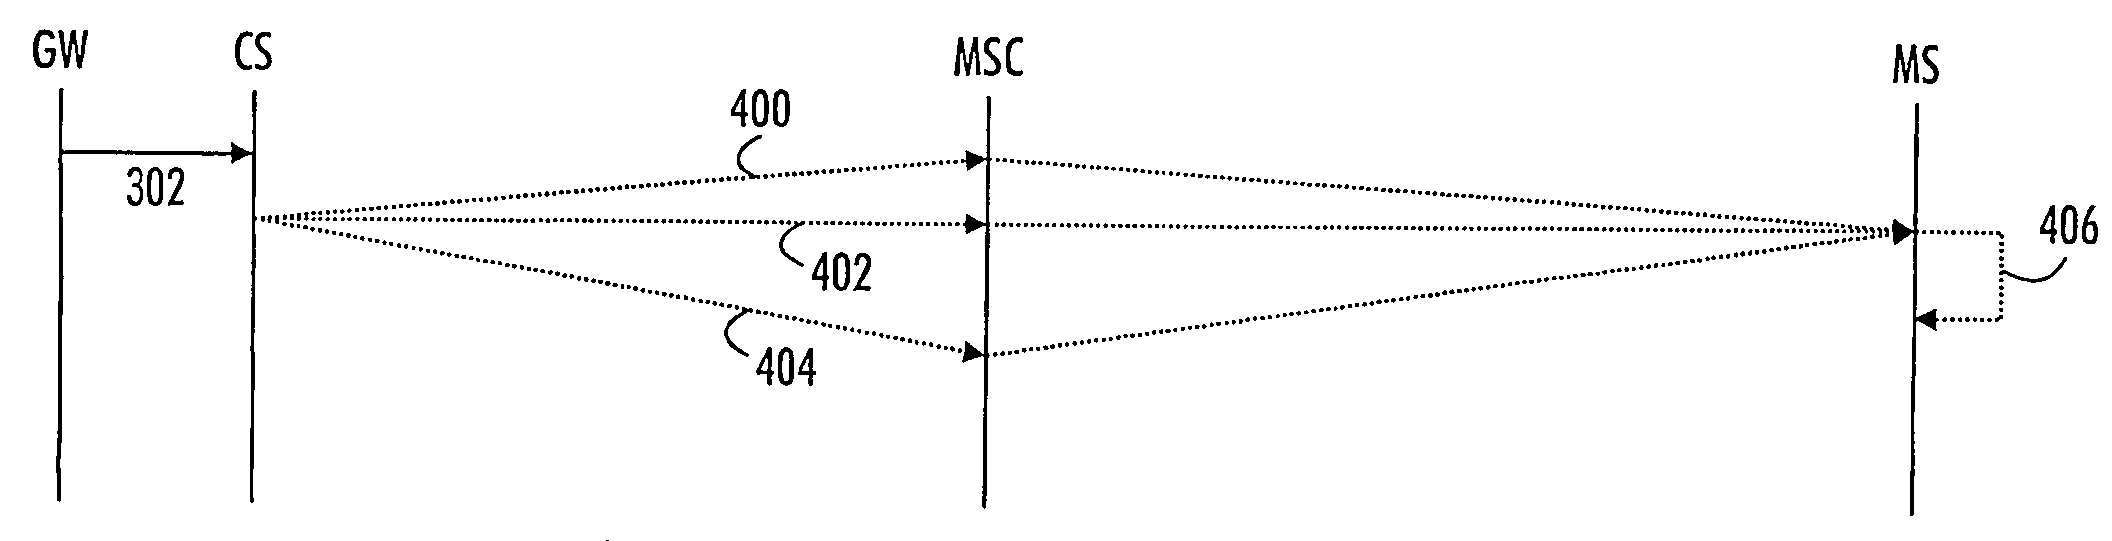 Data transmission method to a wireless device which does not have an active data connection to a network